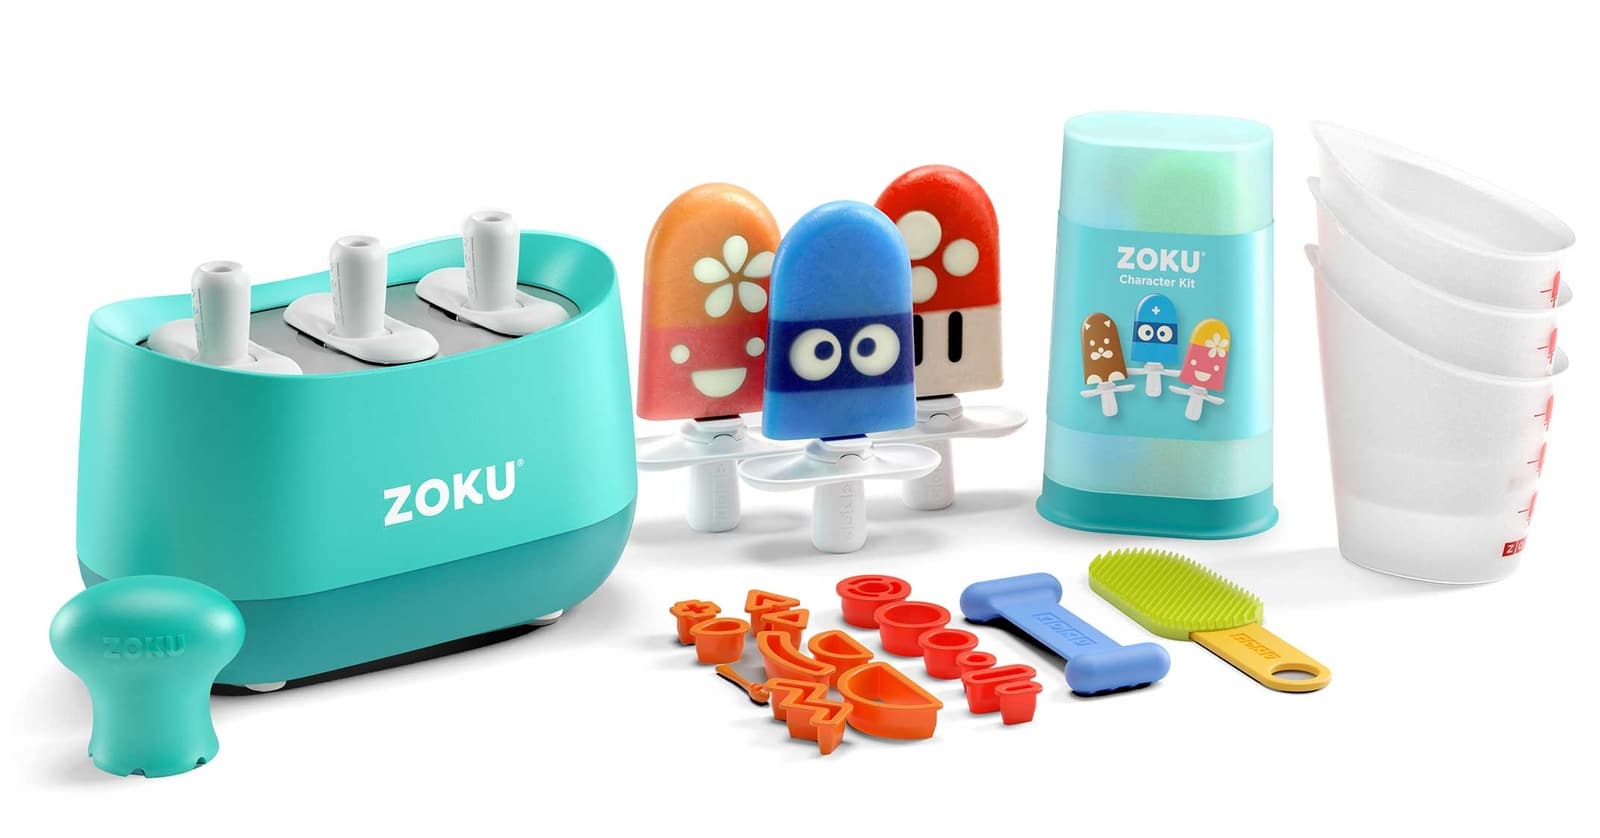 Win a Zoku Quick Popsicle Maker!! Perfect for HOT Summer days! US only,  ends 7/8 - Mom Does Reviews